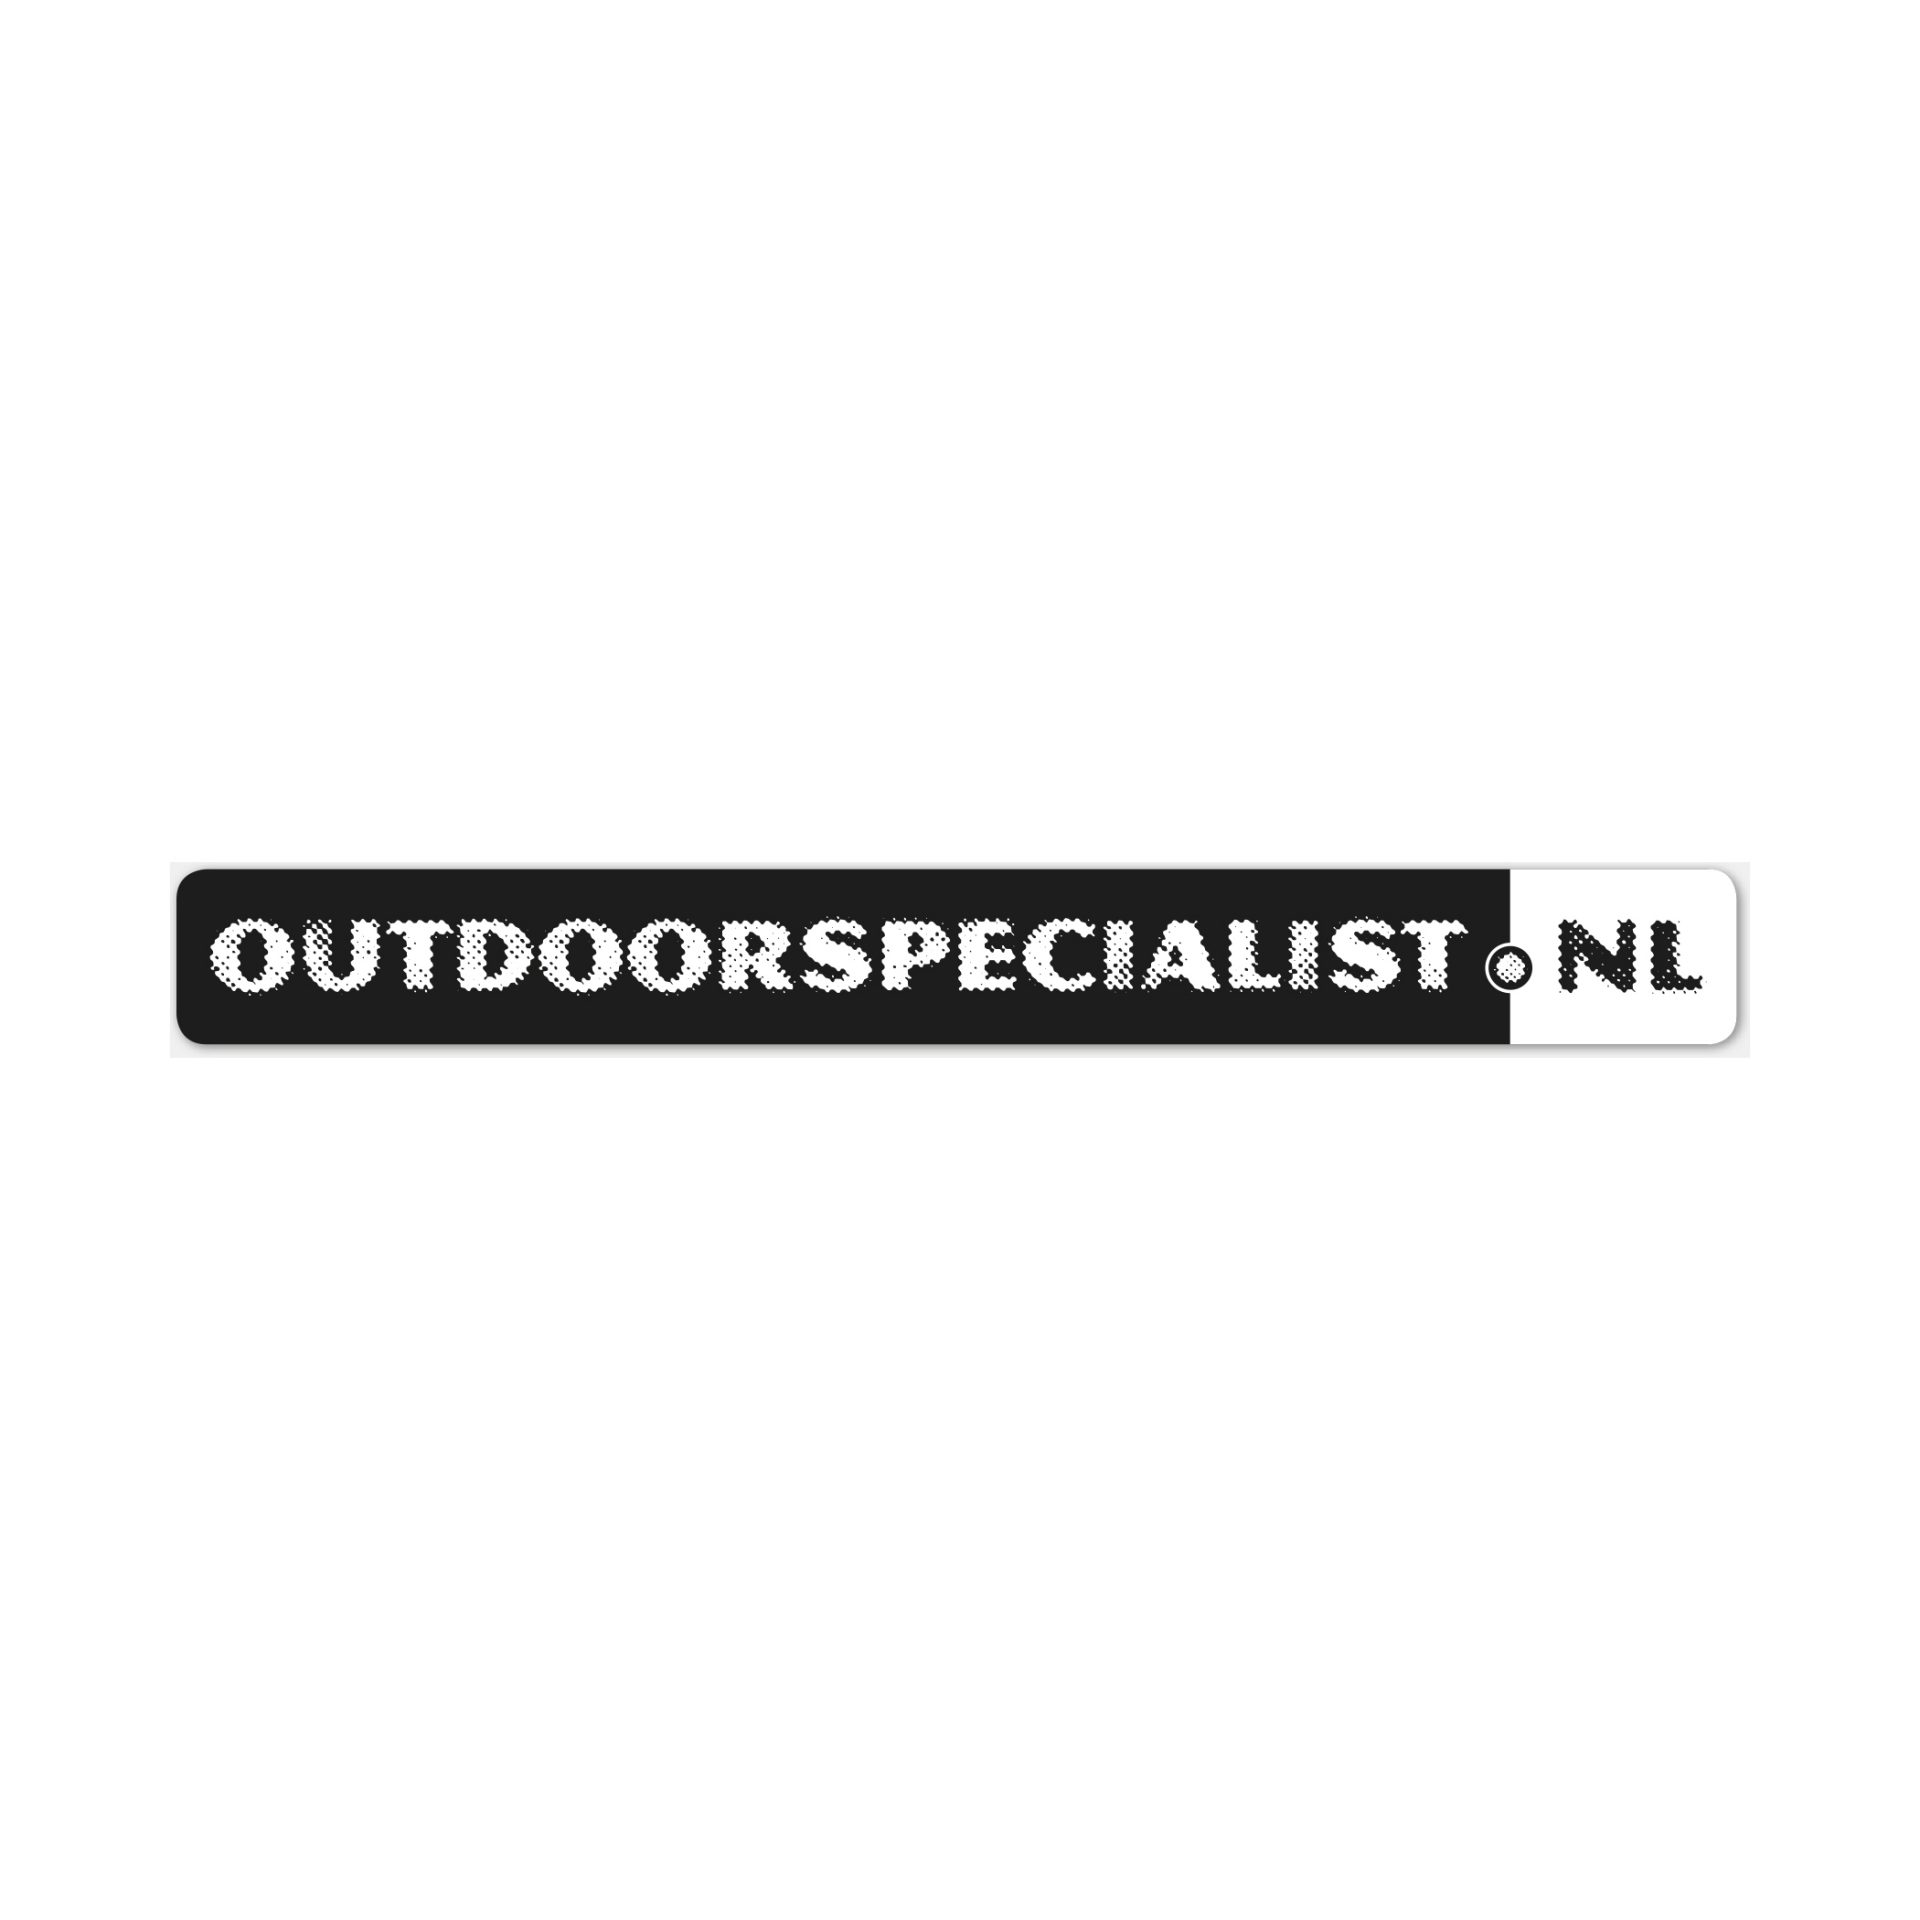 Outdoorspecialist